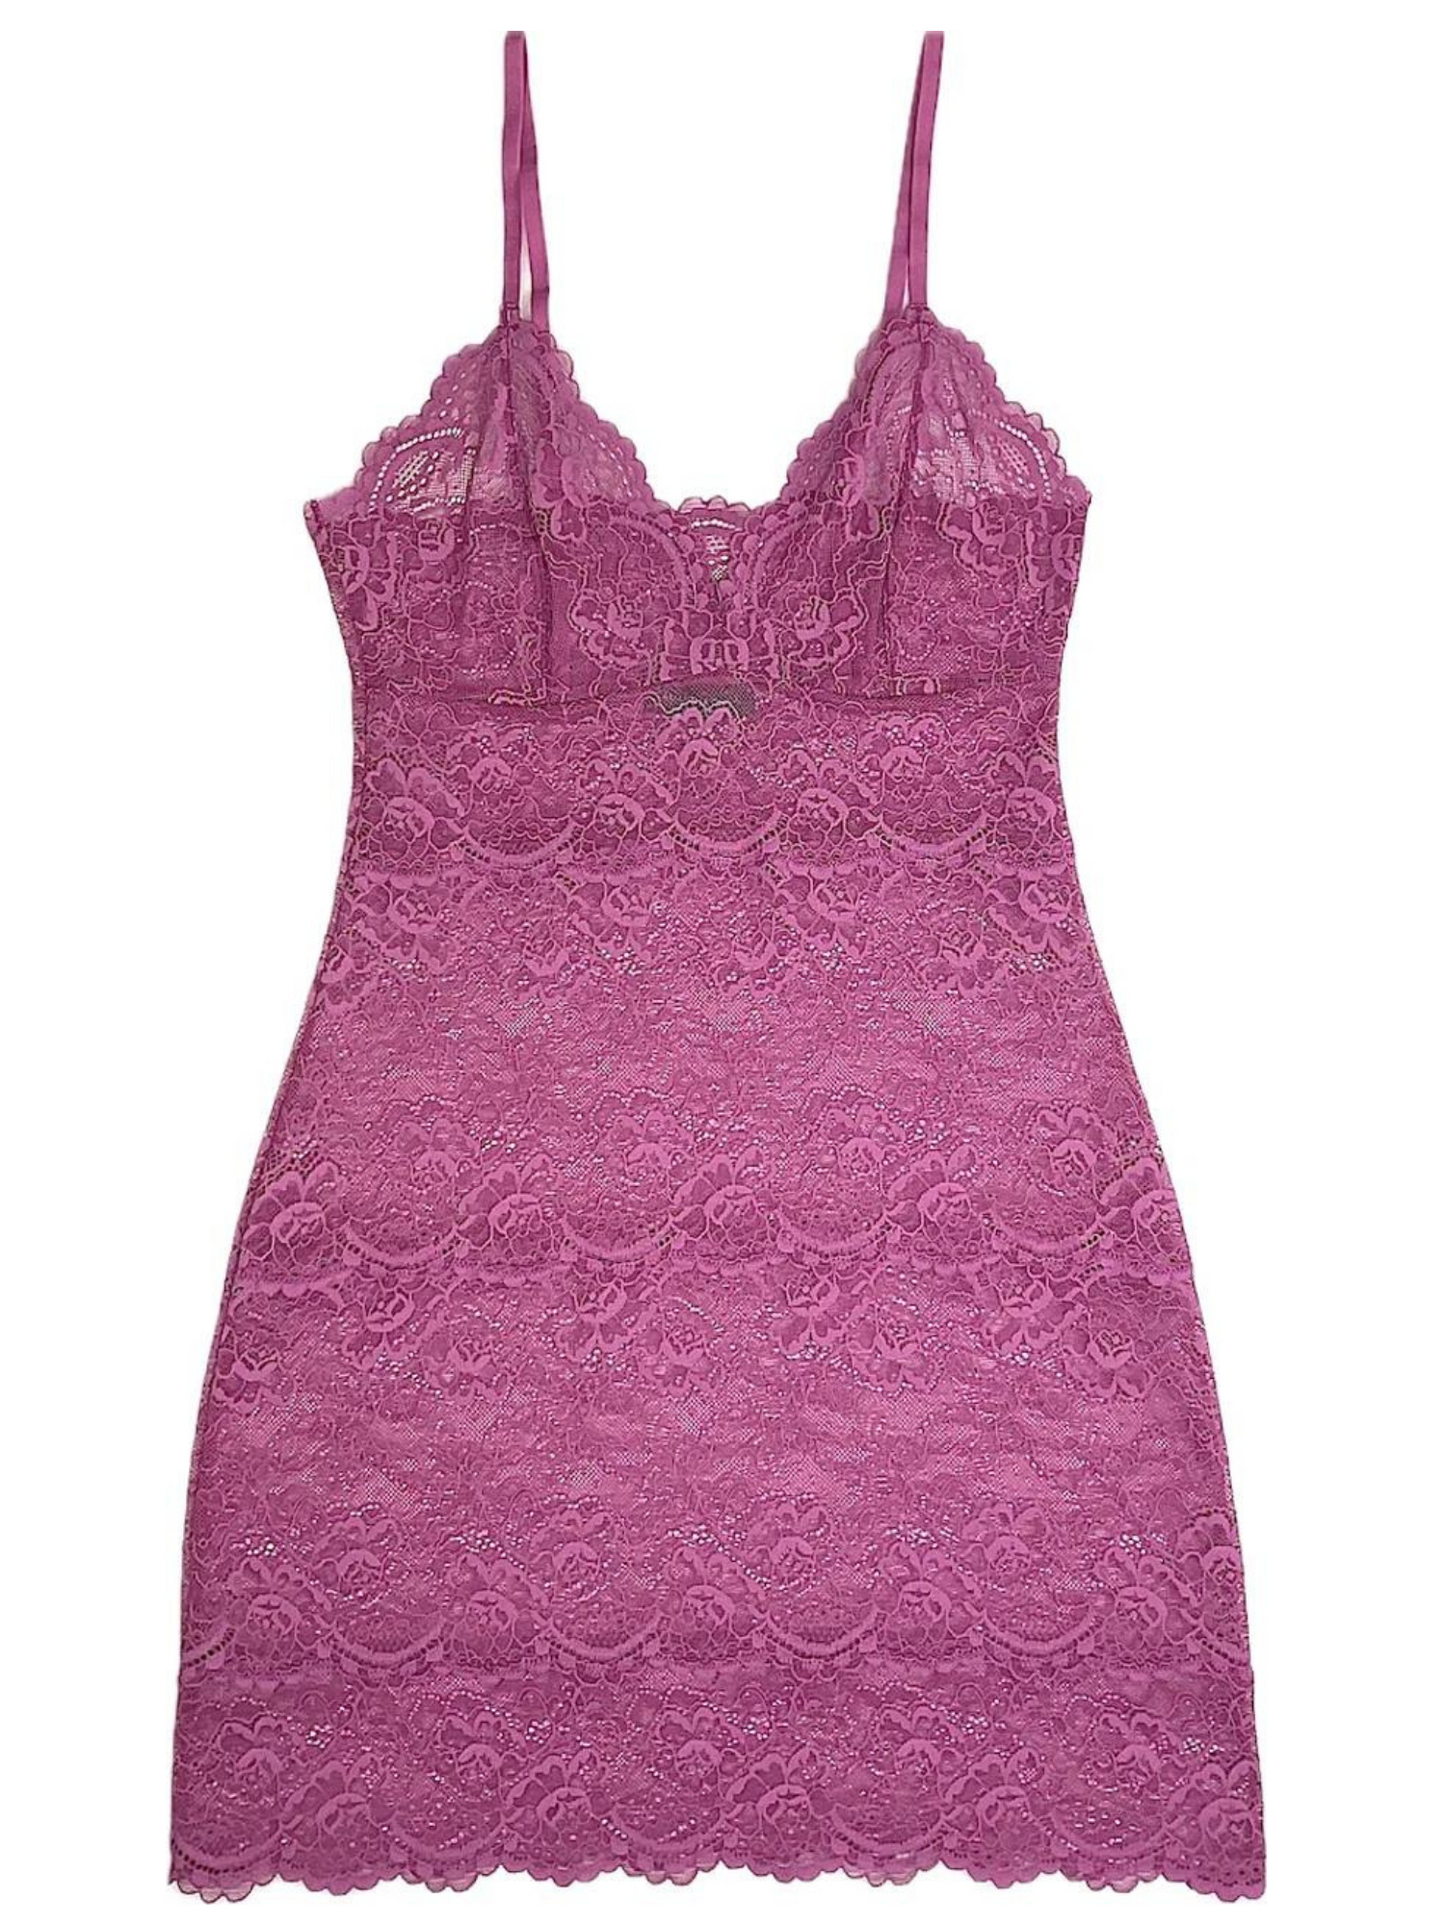 Samantha Chang All Lace Chemise - Orchid